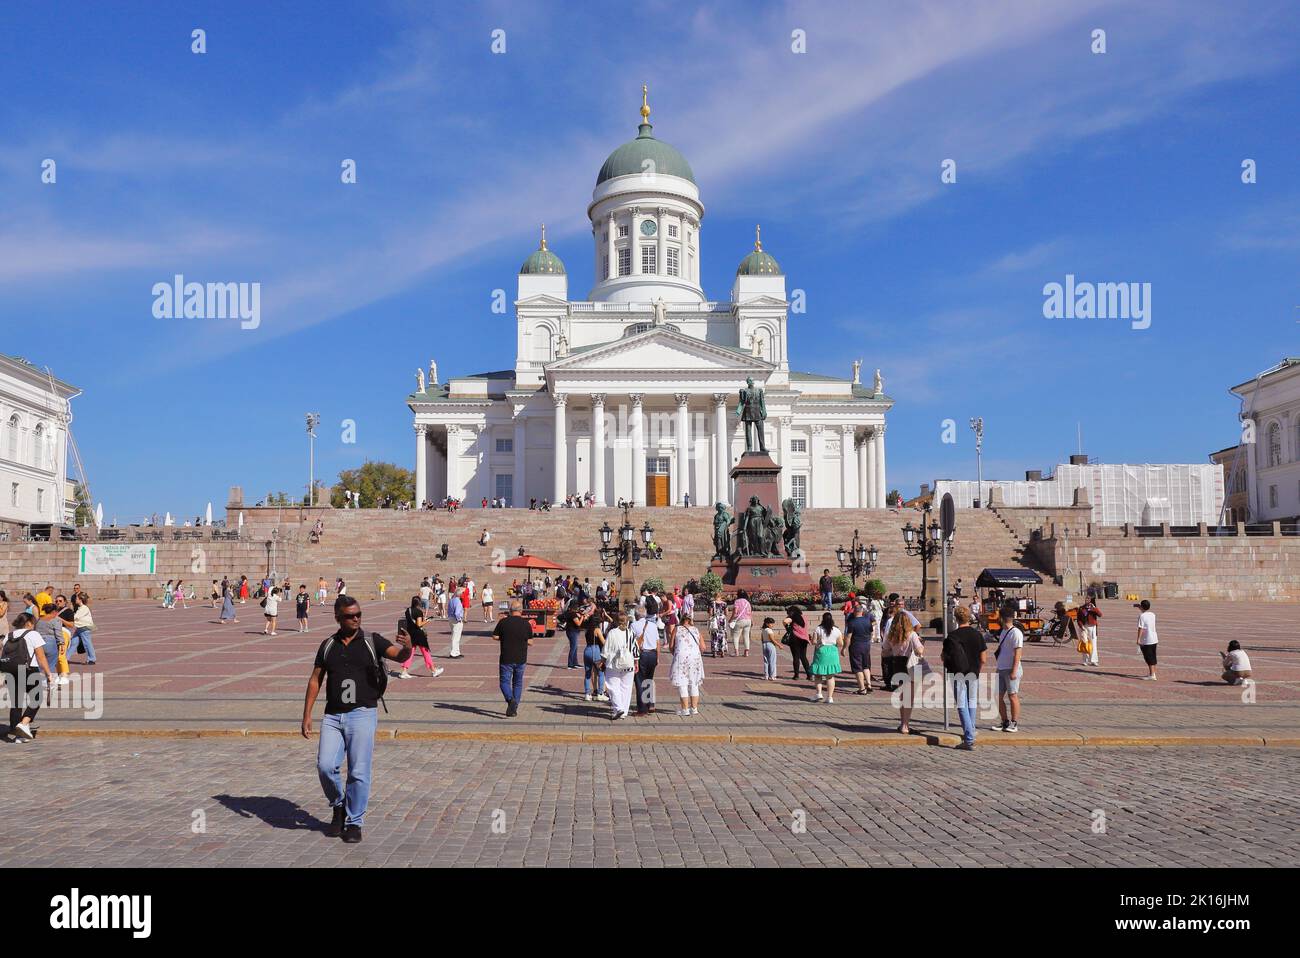 Helsinki, Finland - August 20, 2022: View of the Helsinki cathedral at the Senate square. Stock Photo